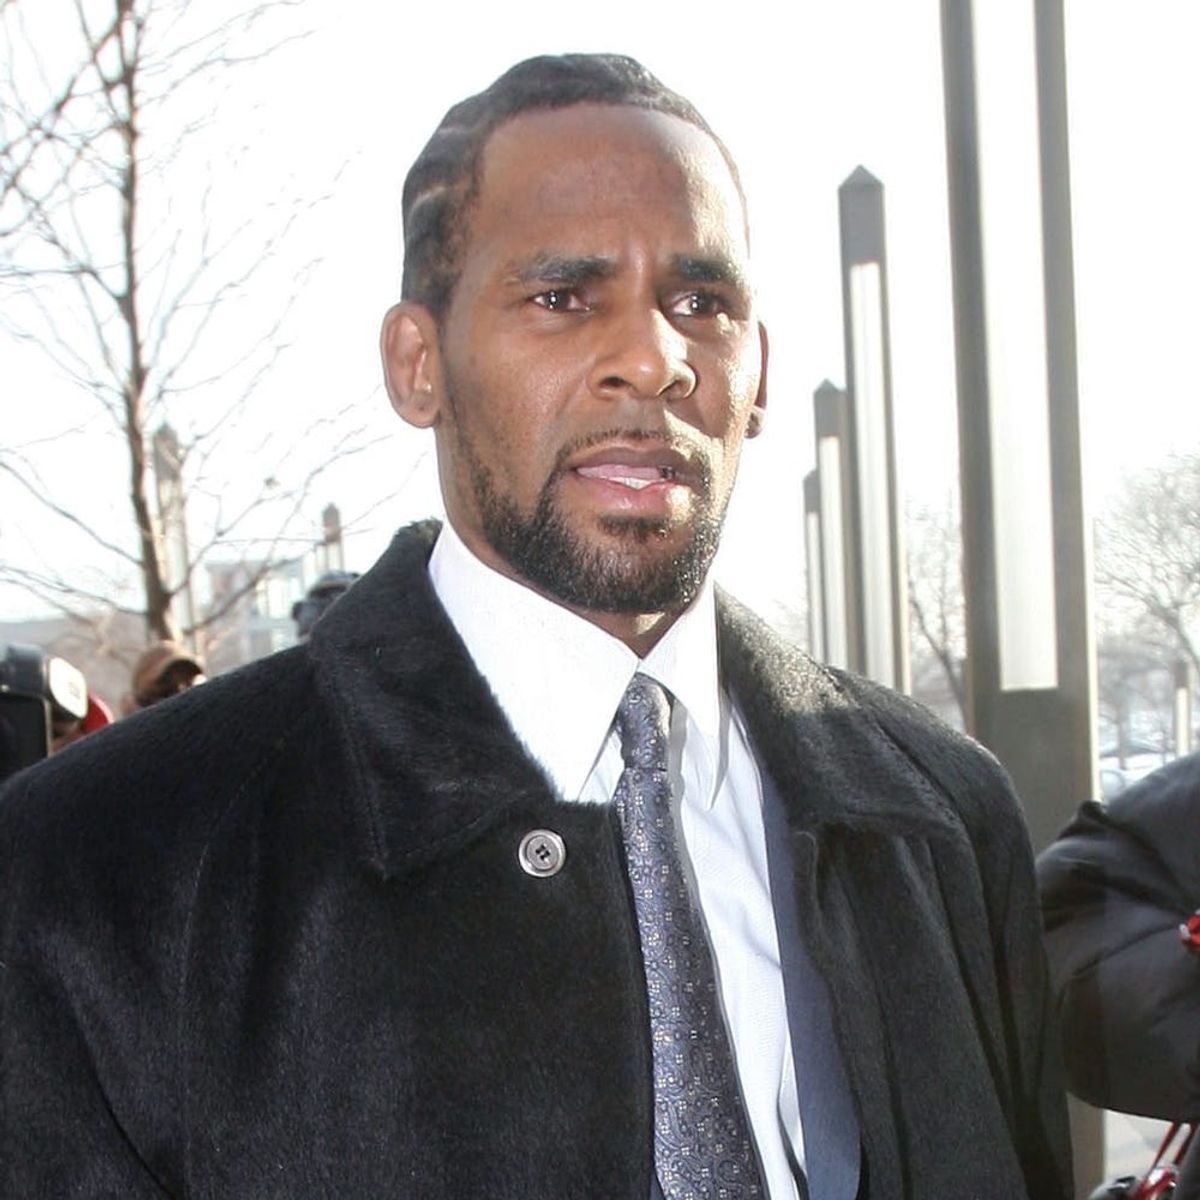 Why Time’s Up Is Joining a Campaign to Hold R. Kelly Accountable